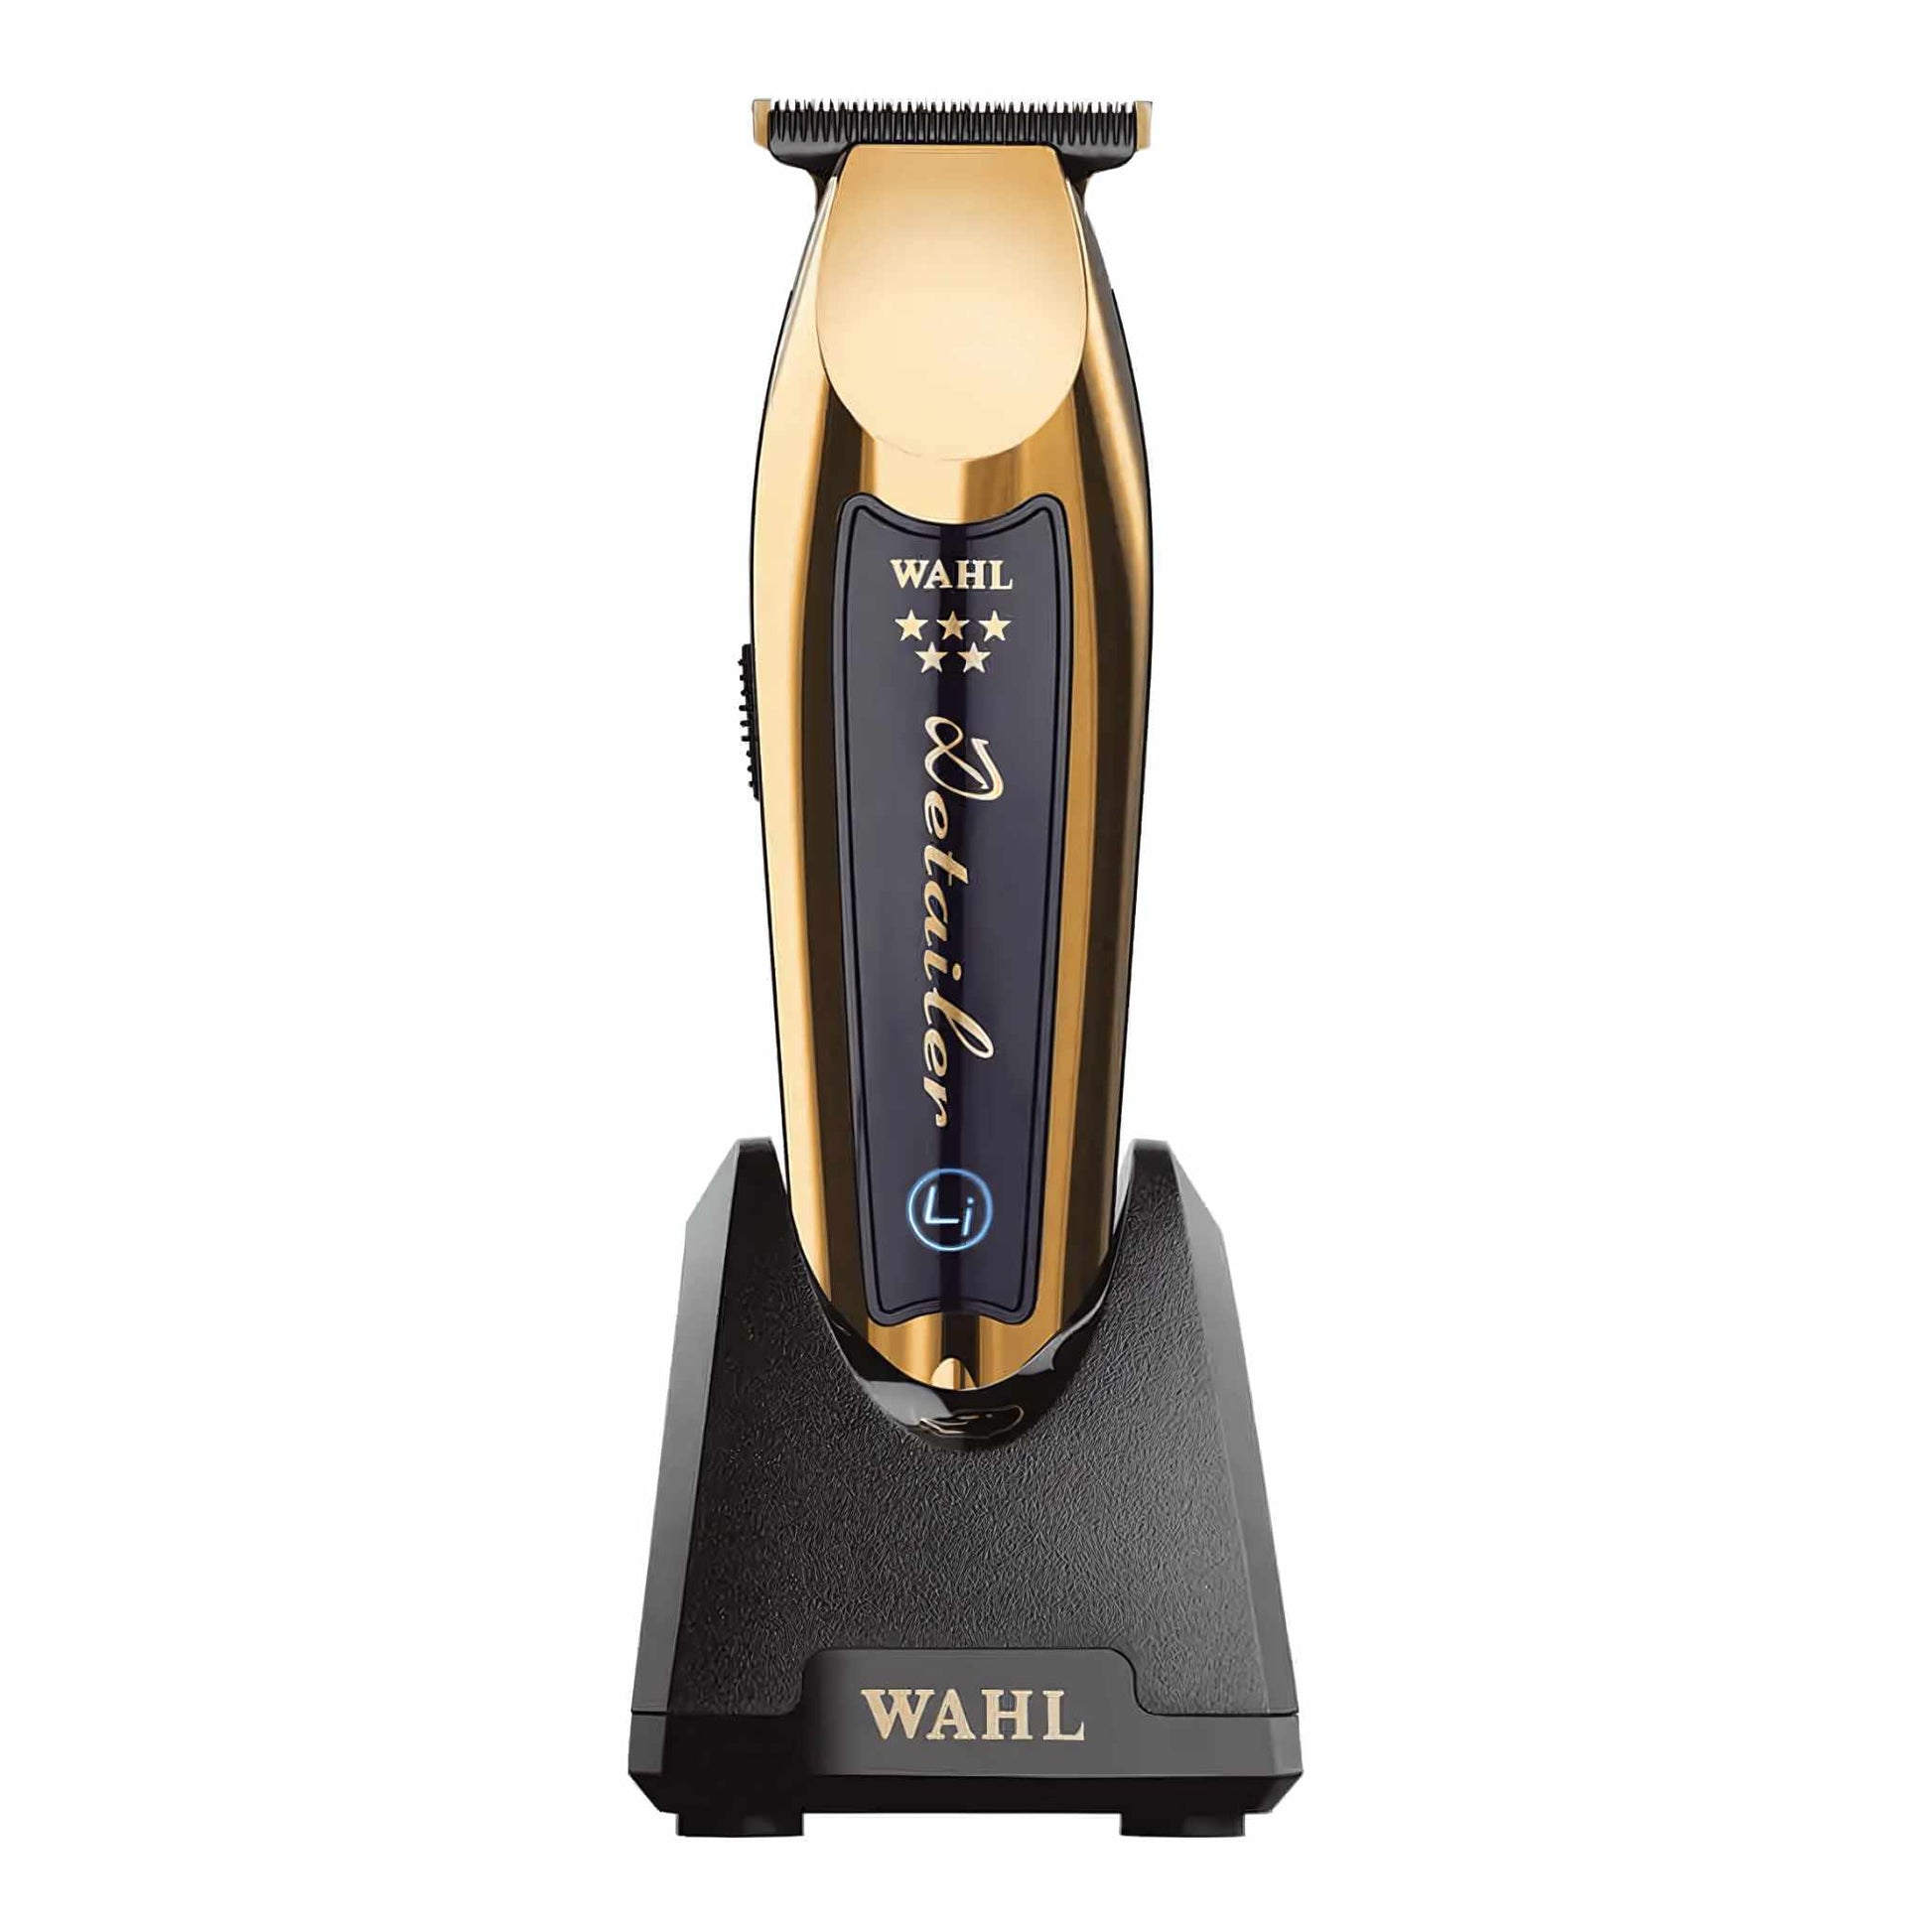 Wahl Gold Cordless Detailer Li in Charging Stand